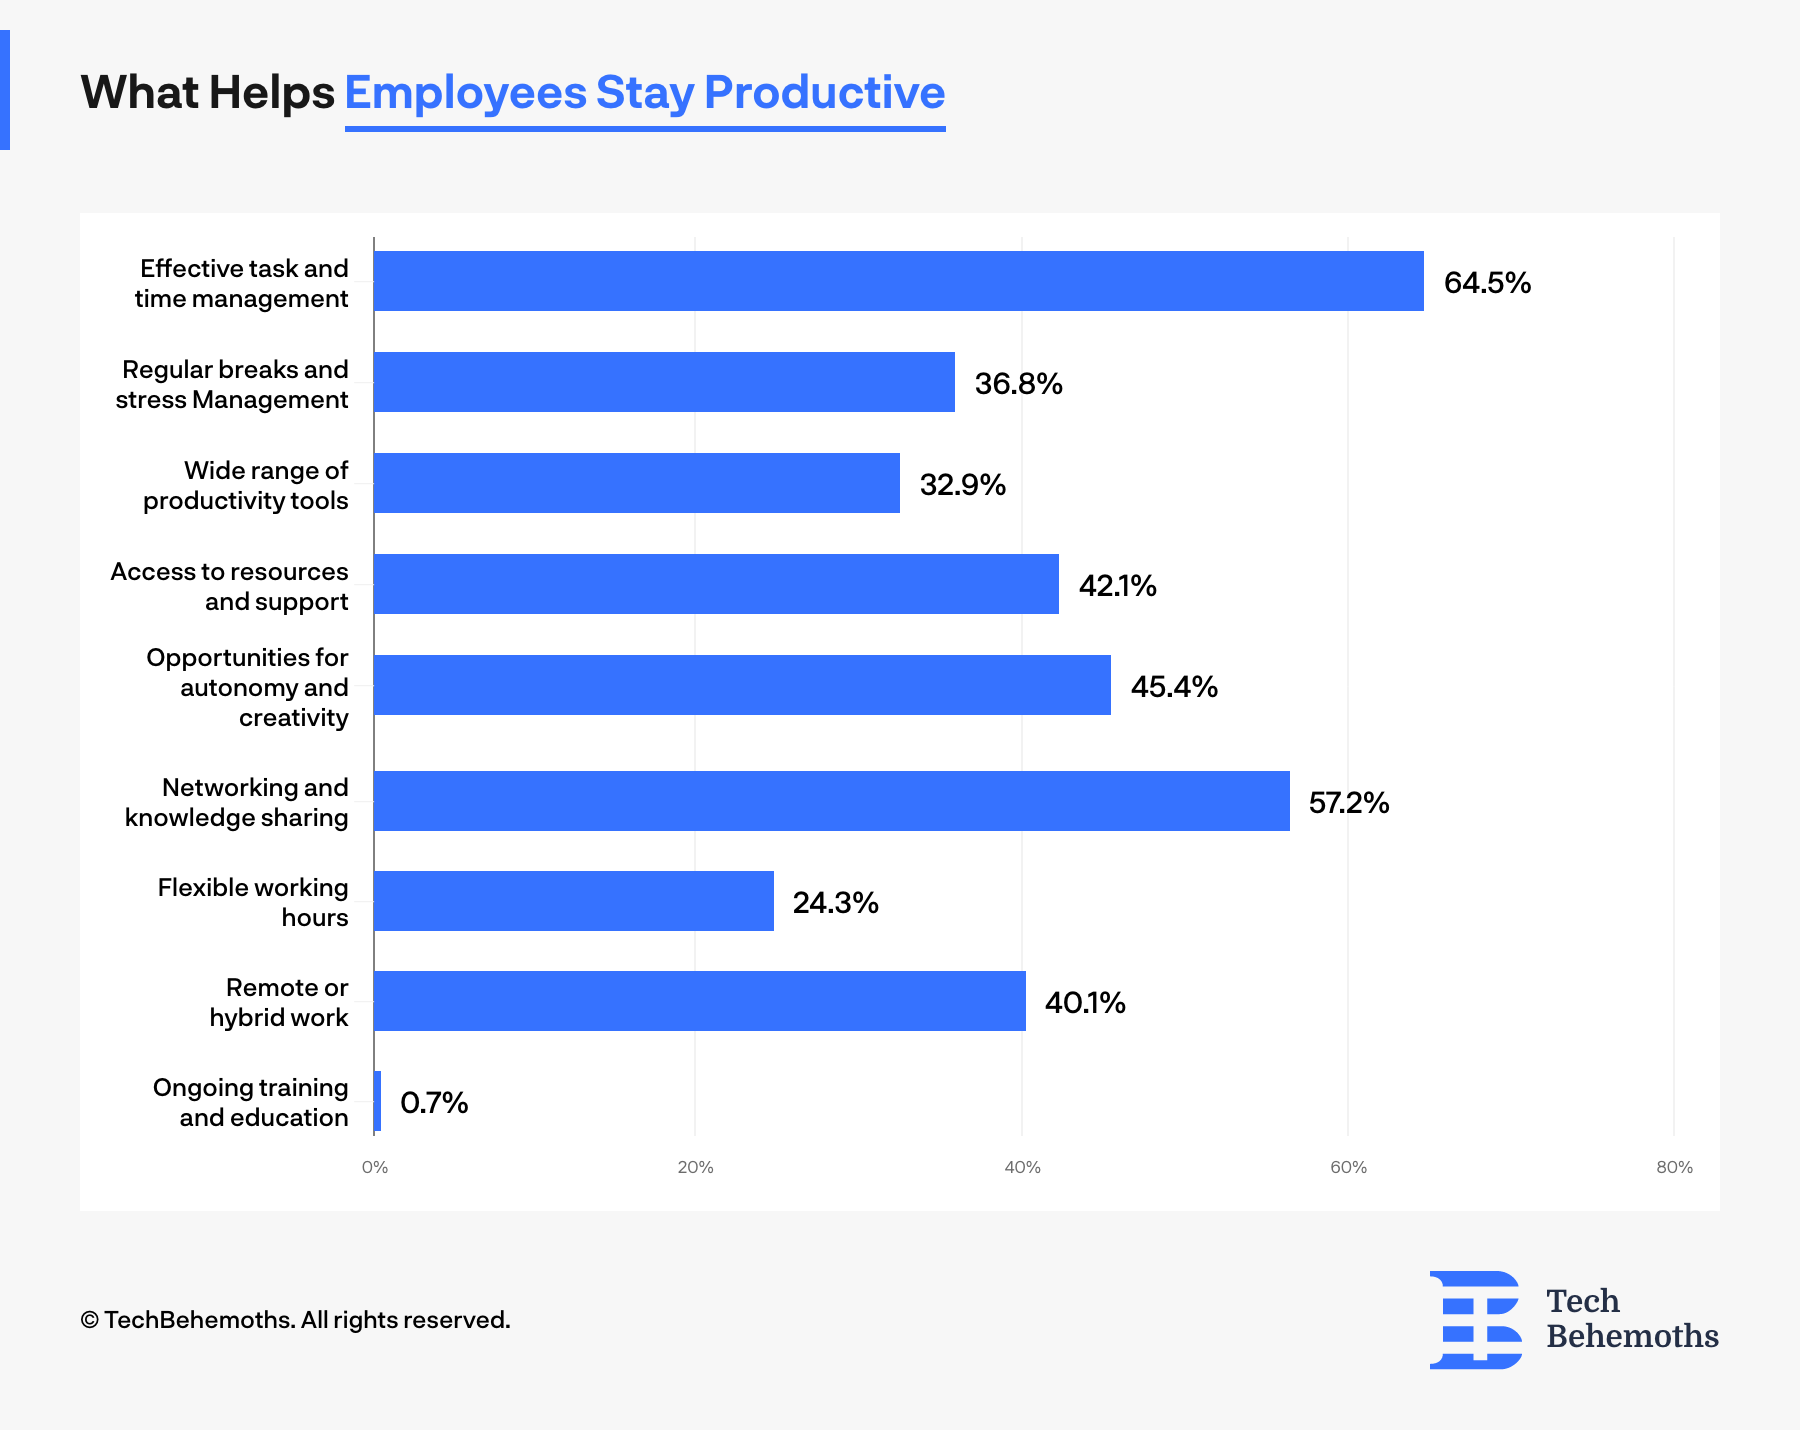 Effective time and task management is the main reason why employees are productive according to 64.5% of respondents